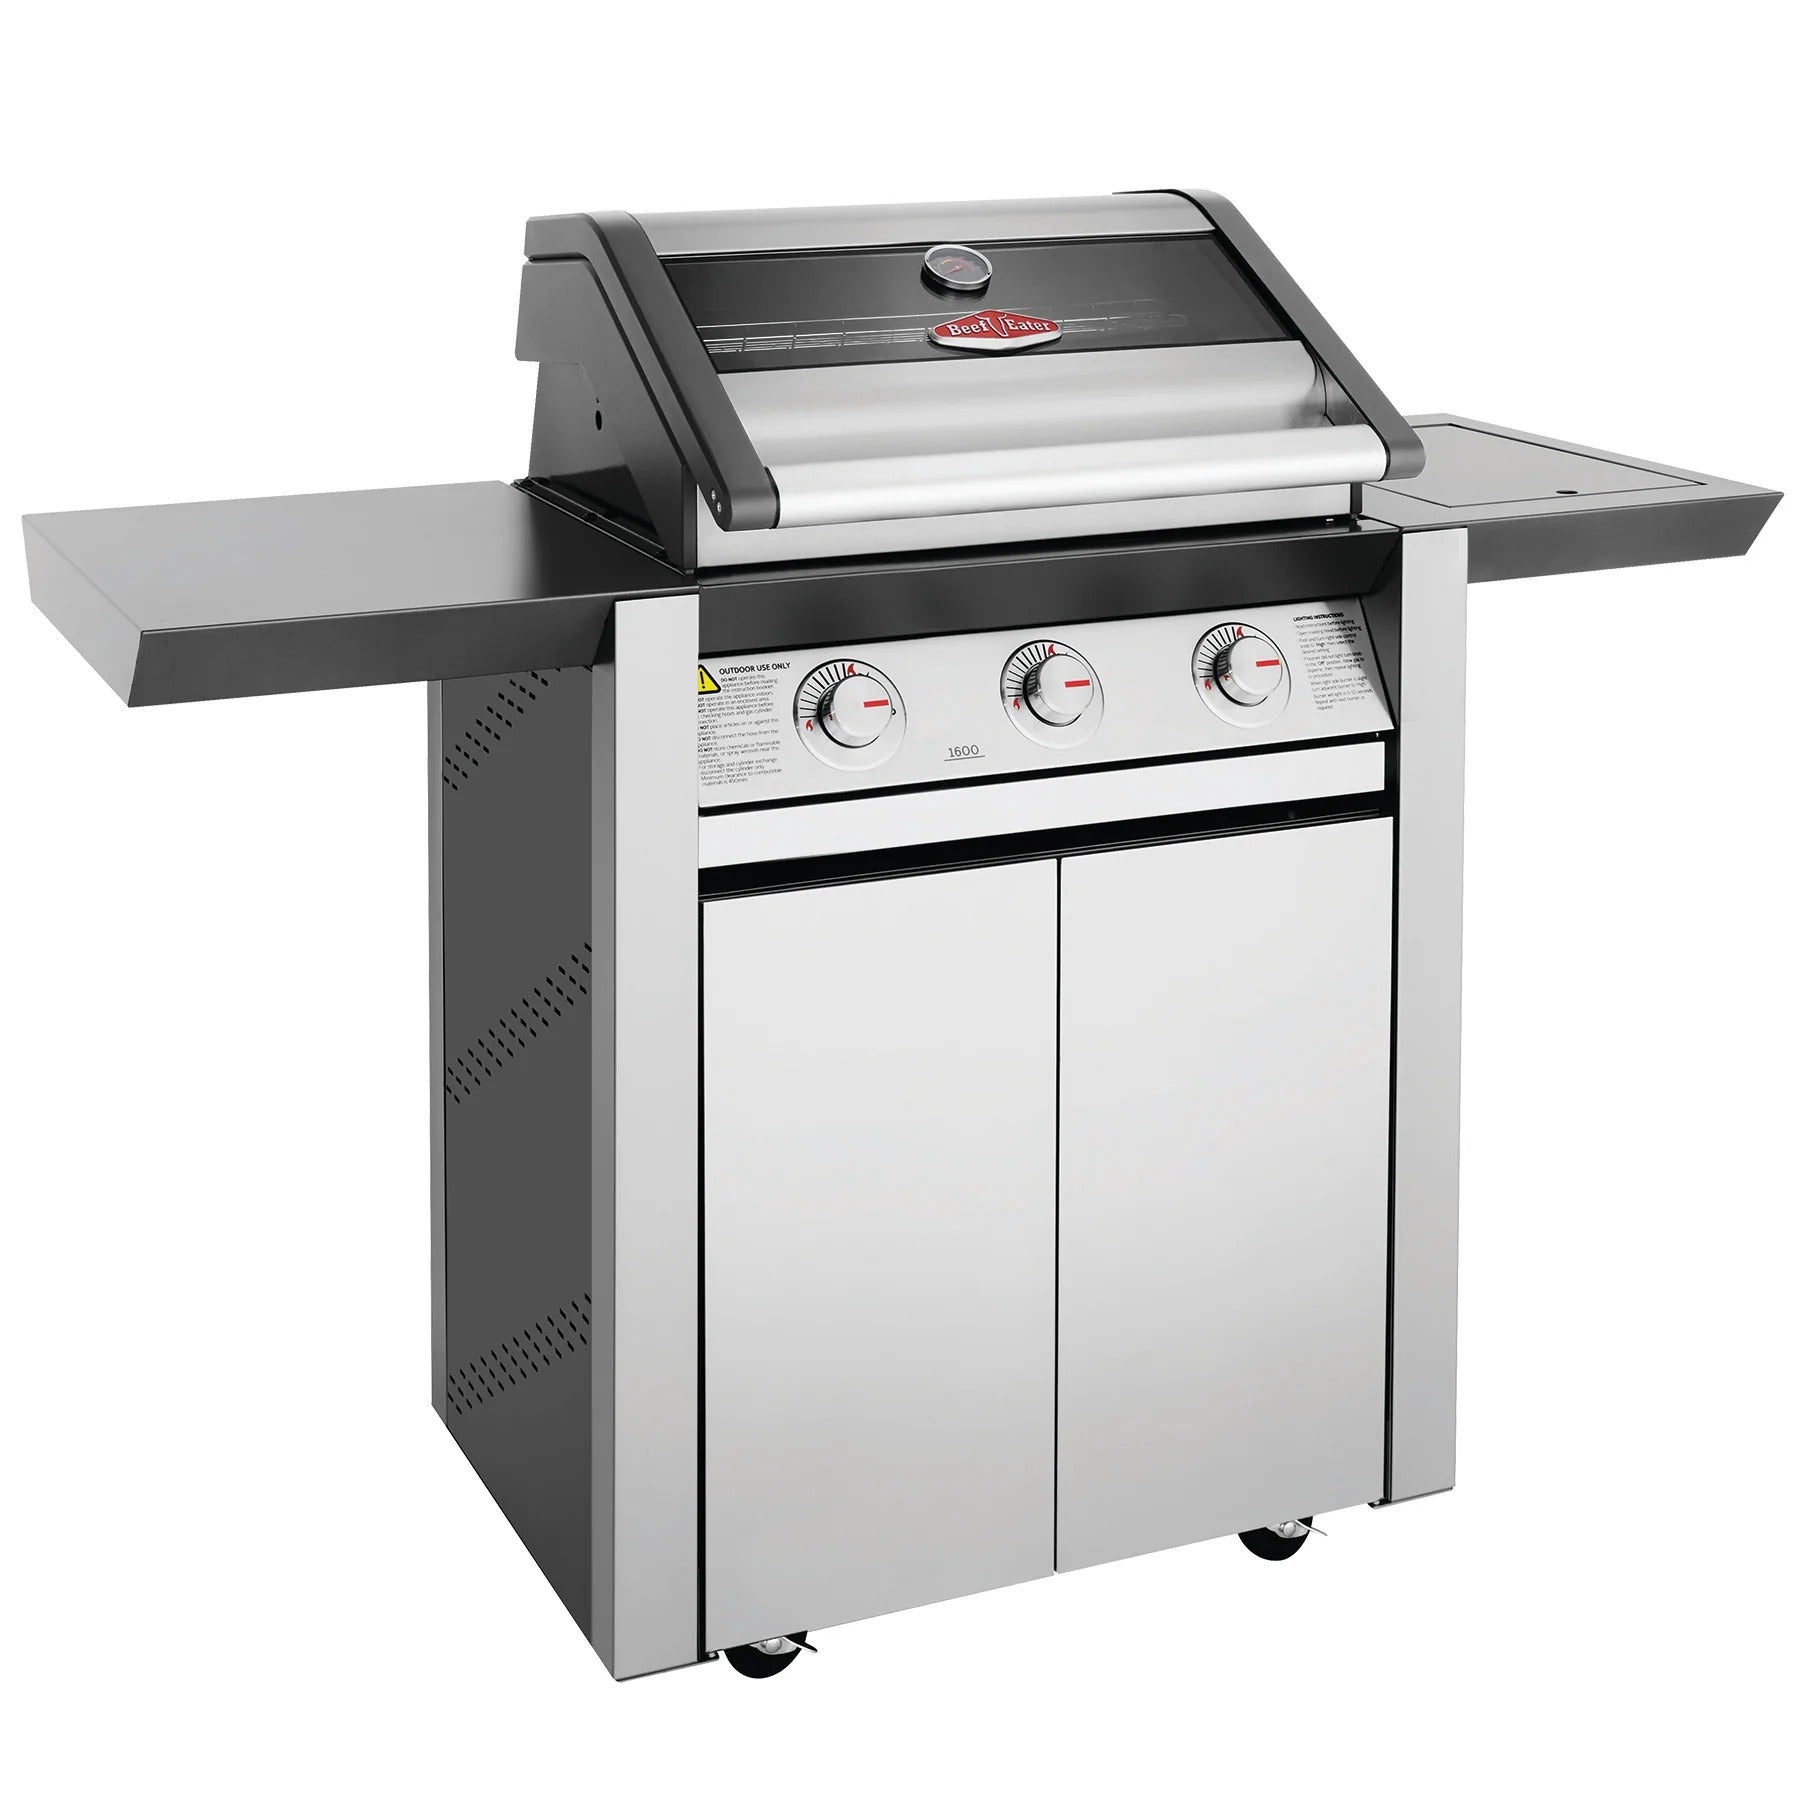 BeefEater 1600S Series 3 Burner Barbecue with Cabinet Trolley and Side Burner - Vookoo Lifestyle